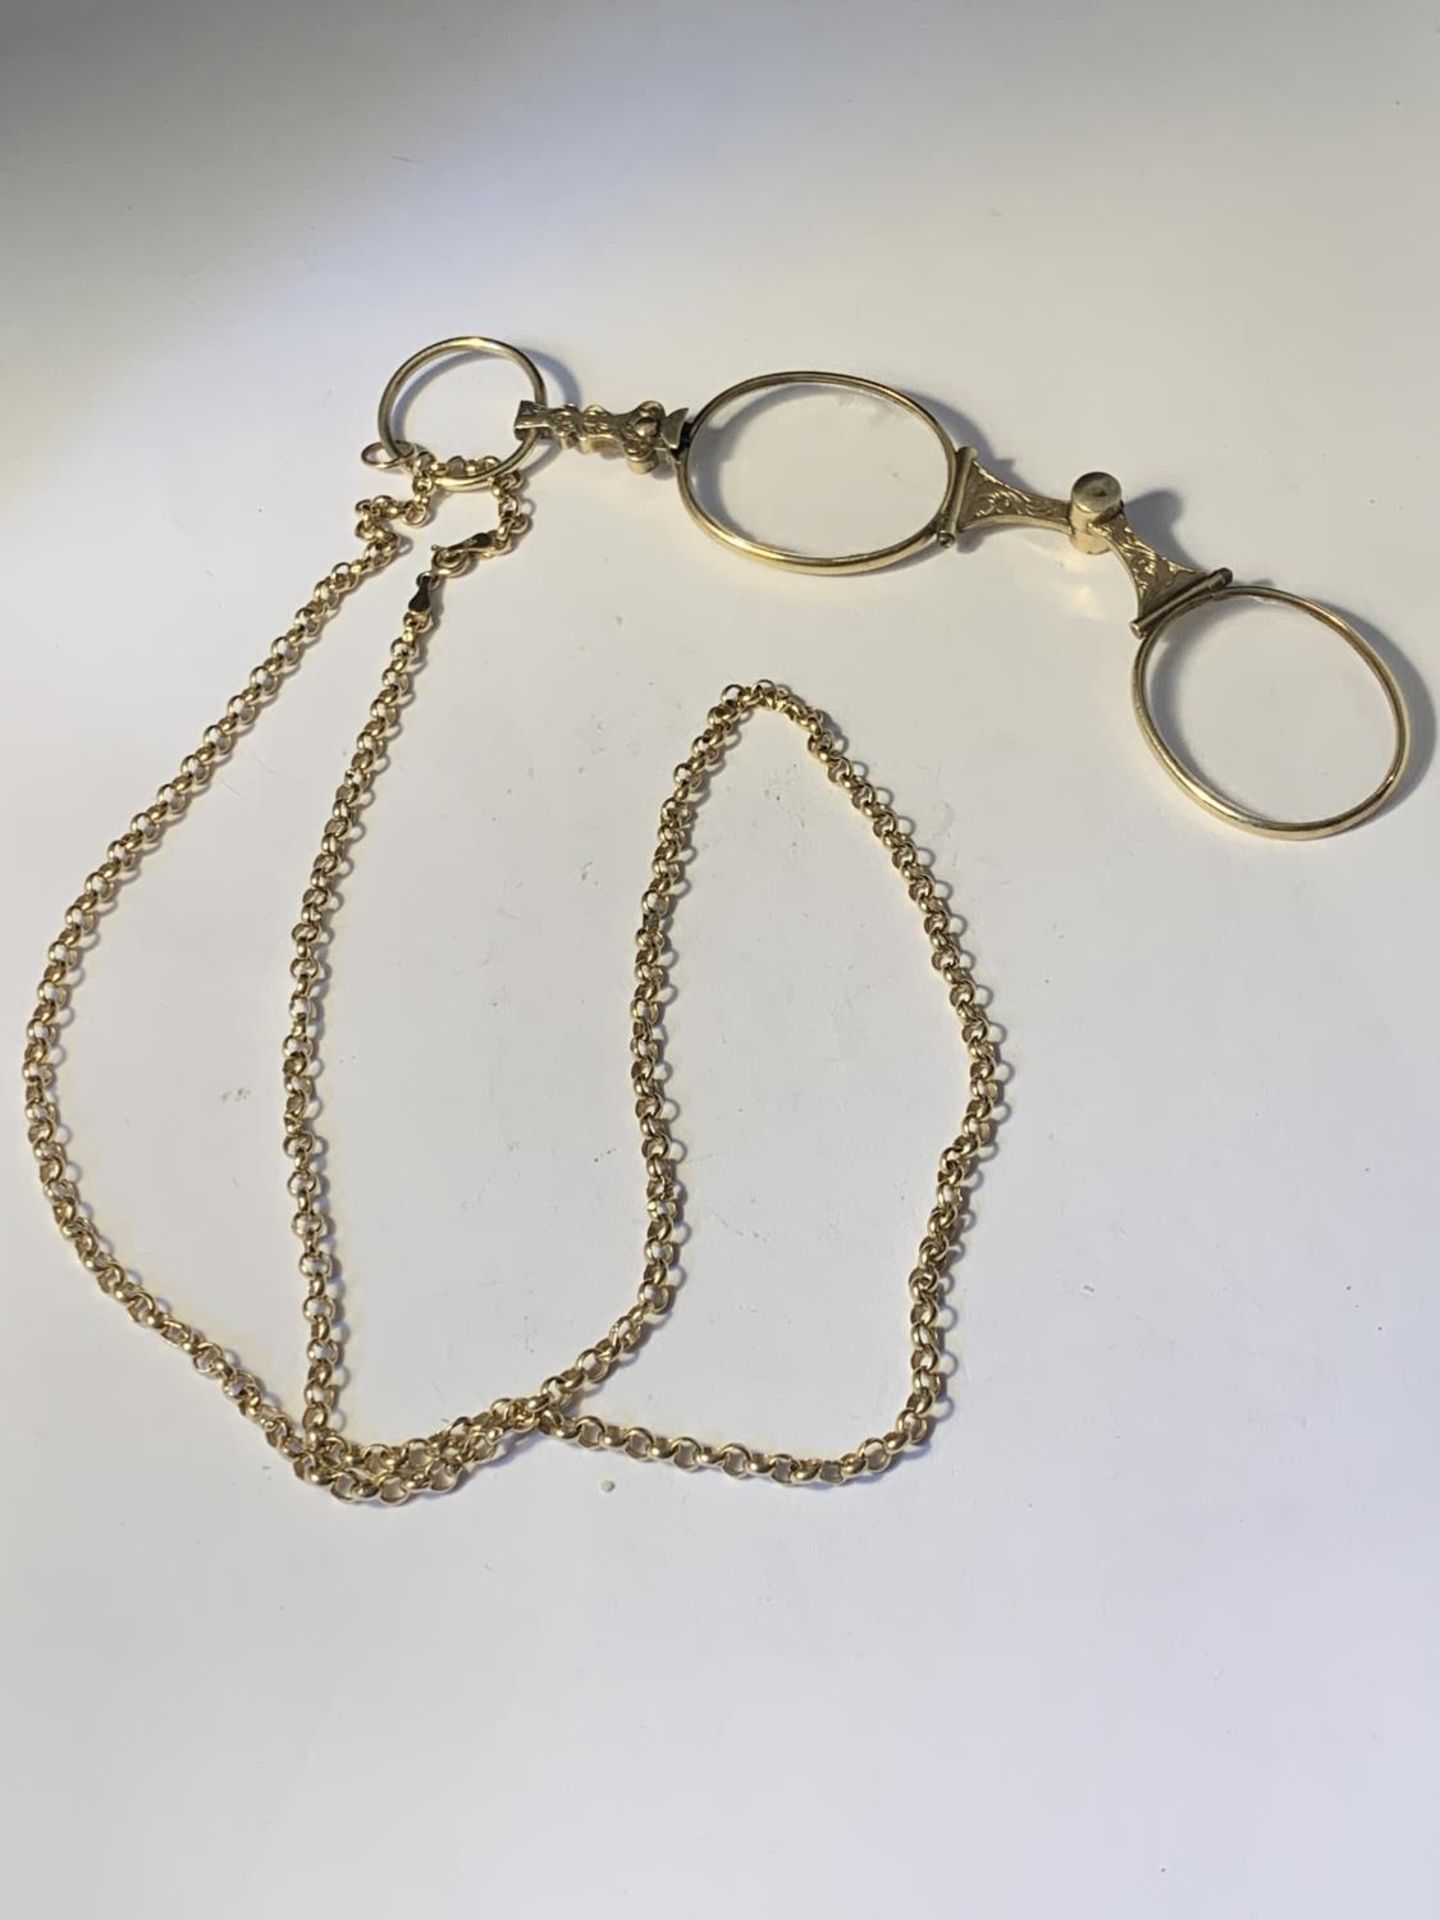 A 9 CARAT GOLD CHAIN GROSS WEIGHT 4.29 GRAMS WITH A PAIR OF GOLD PLATED ORNATE PINCE NEZ